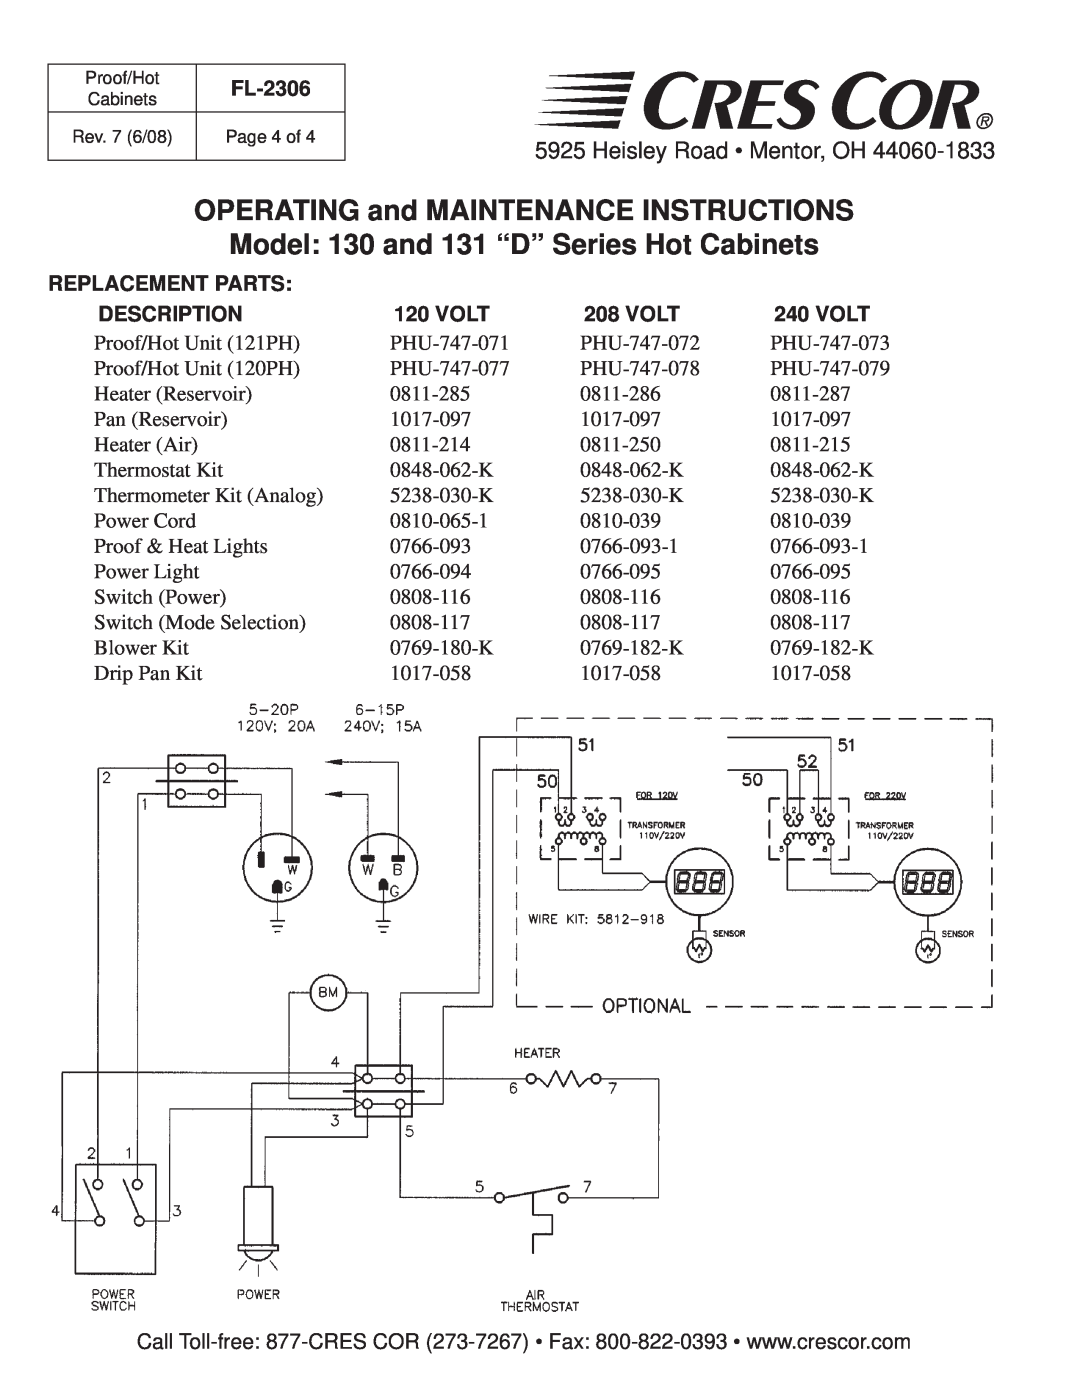 Cres Cor 121PH Replacement Parts, Description, Volt, OPERATING and MAINTENANCE INSTRUCTIONS, Heisley Road Mentor, OH 